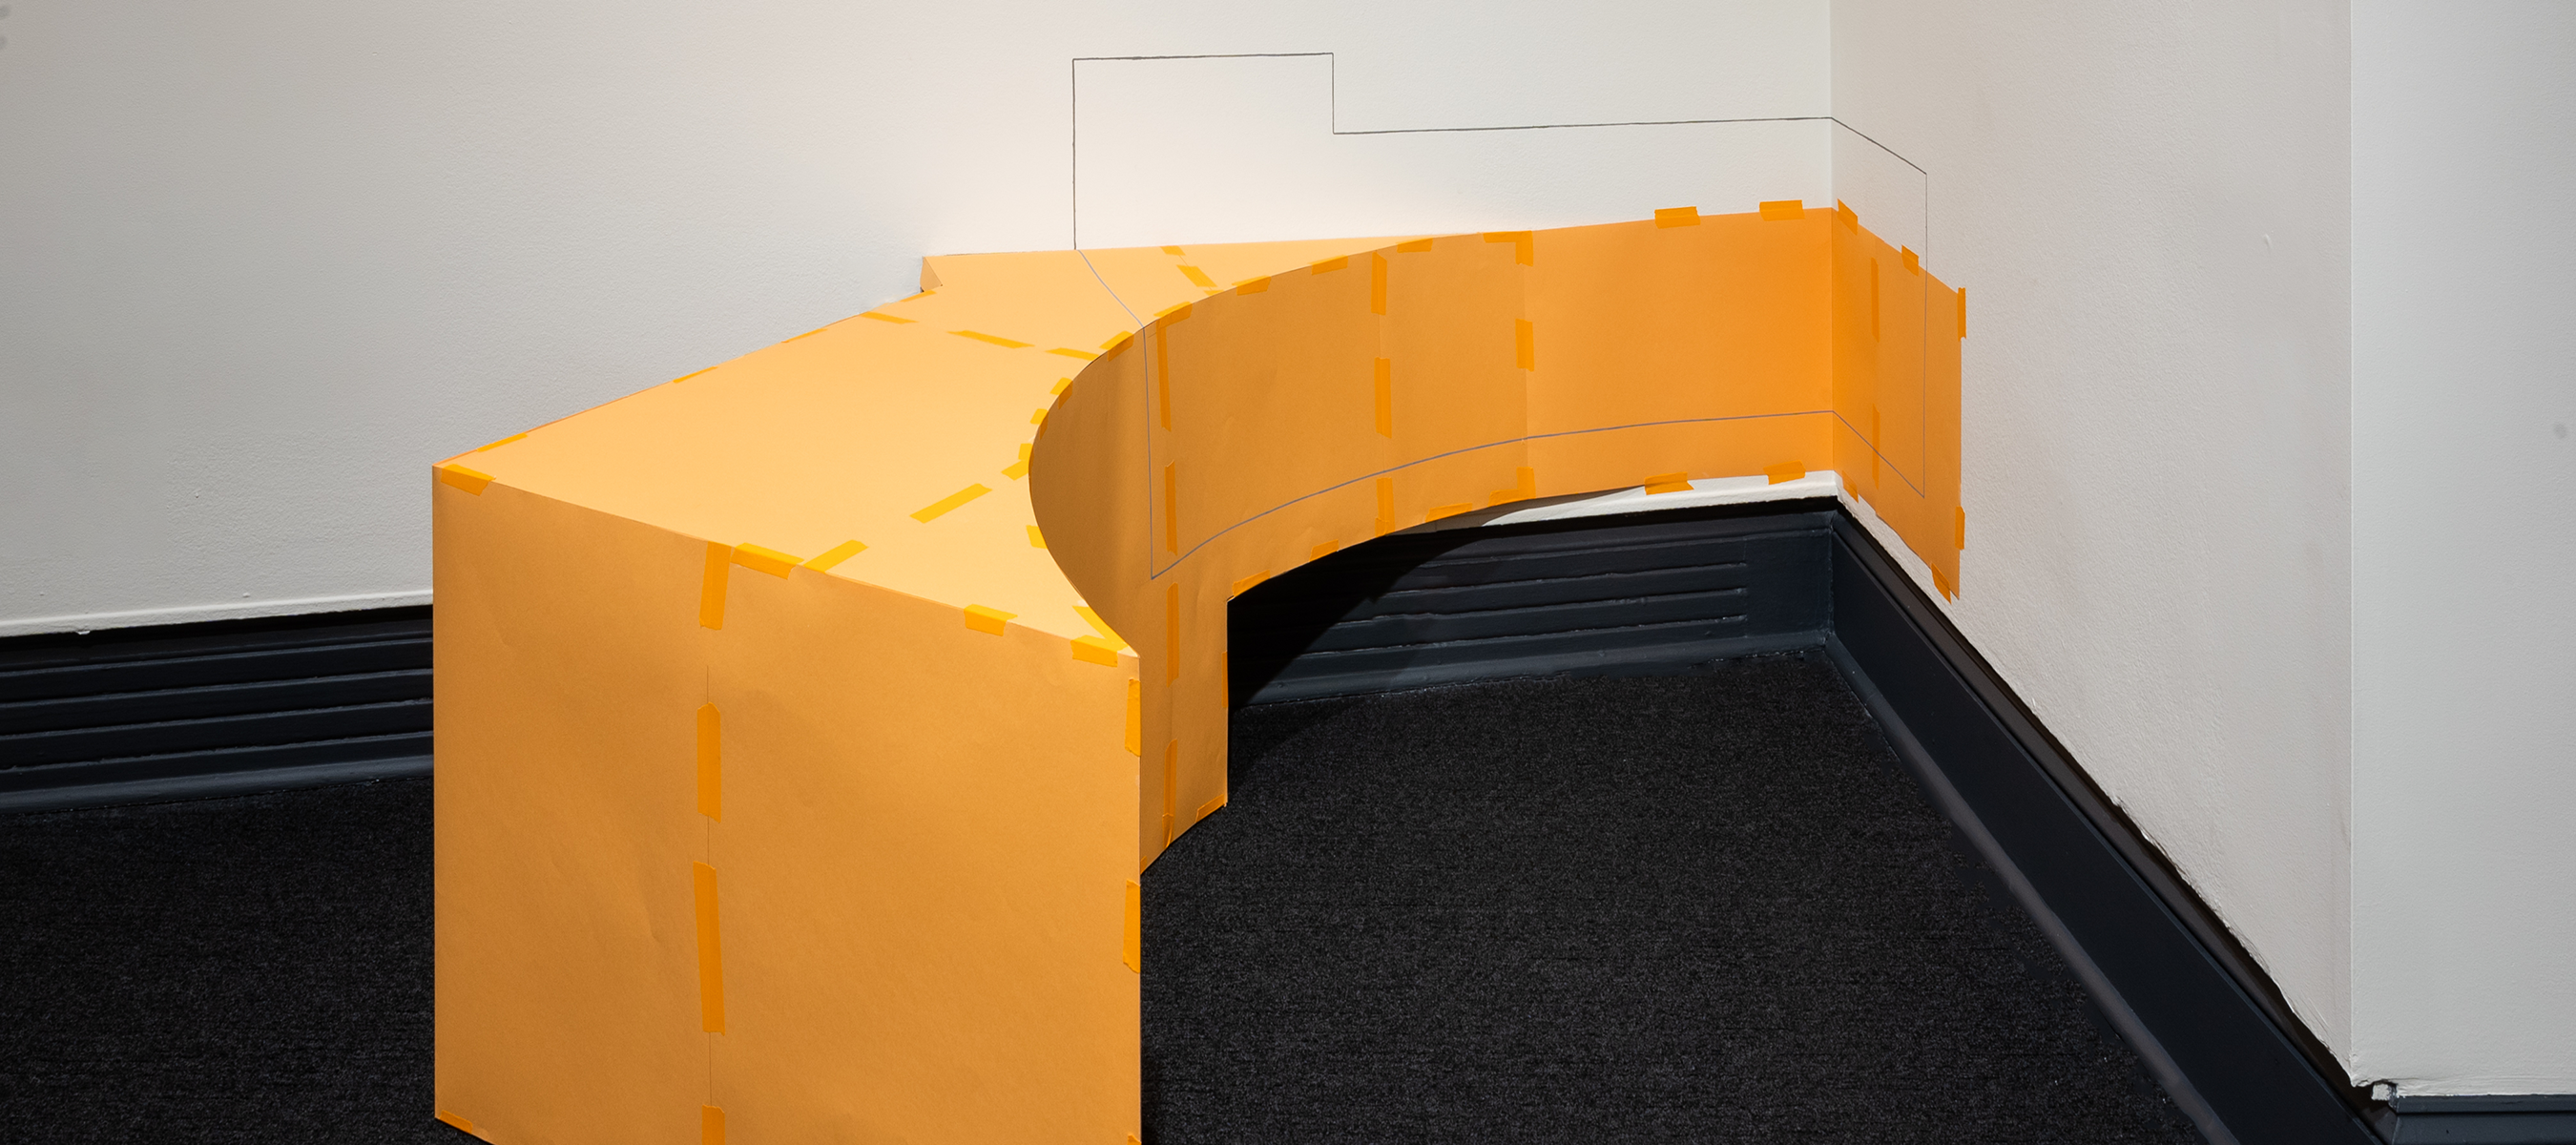 An orange geometric abstract sculpture with varied angles positioned against a corner on the floor. The sculpture has painted lines extending onto the walls.